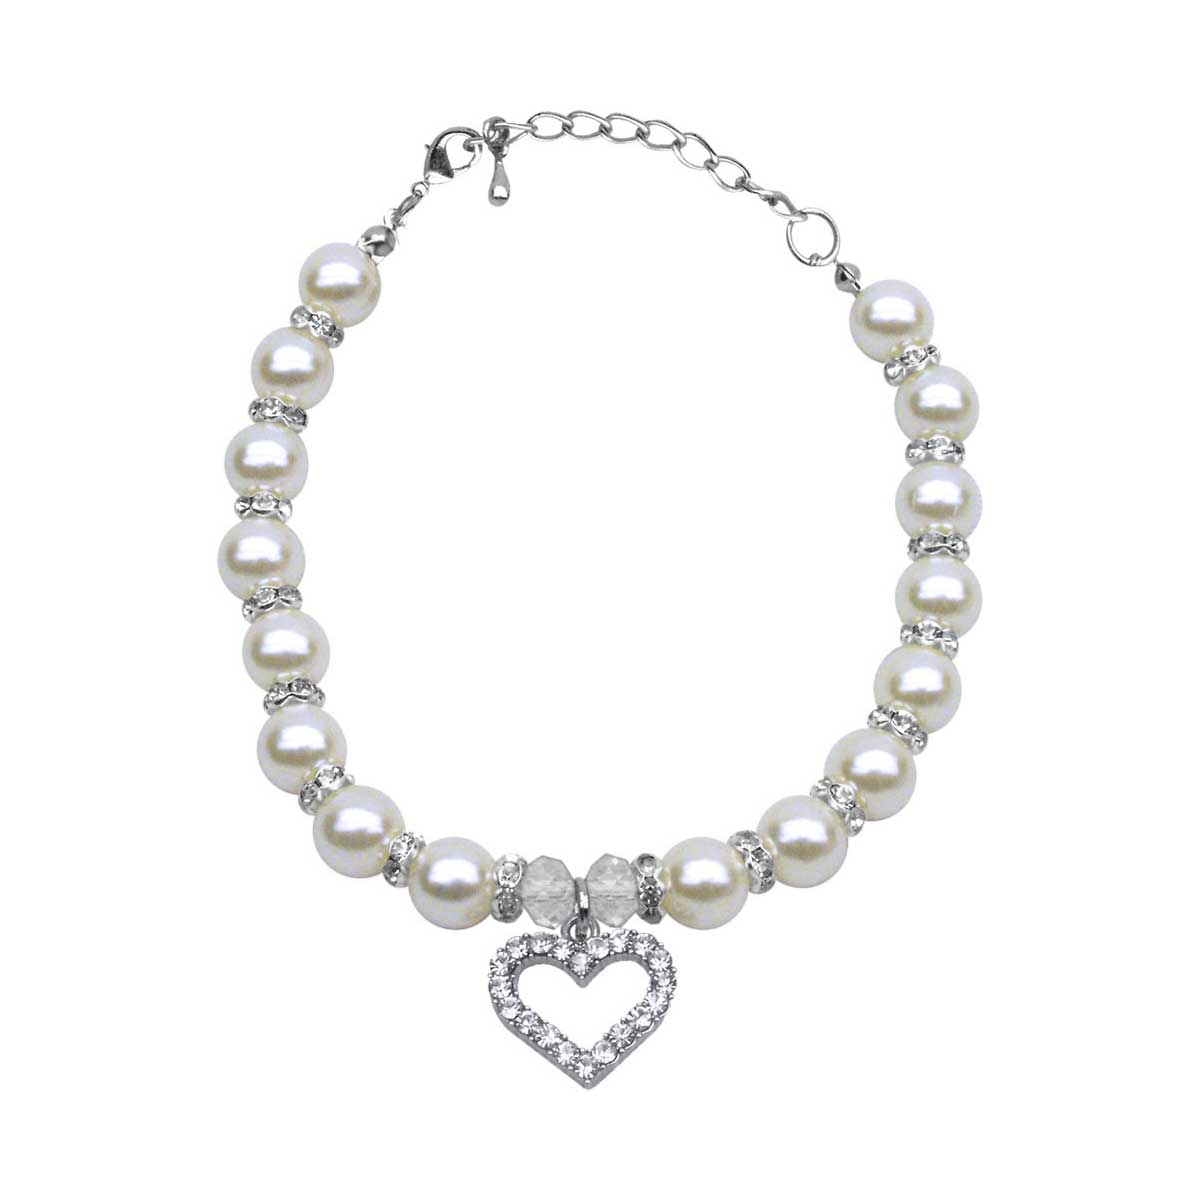 Crystal Heart Necklace with White Pearls | Pawlicious & Company